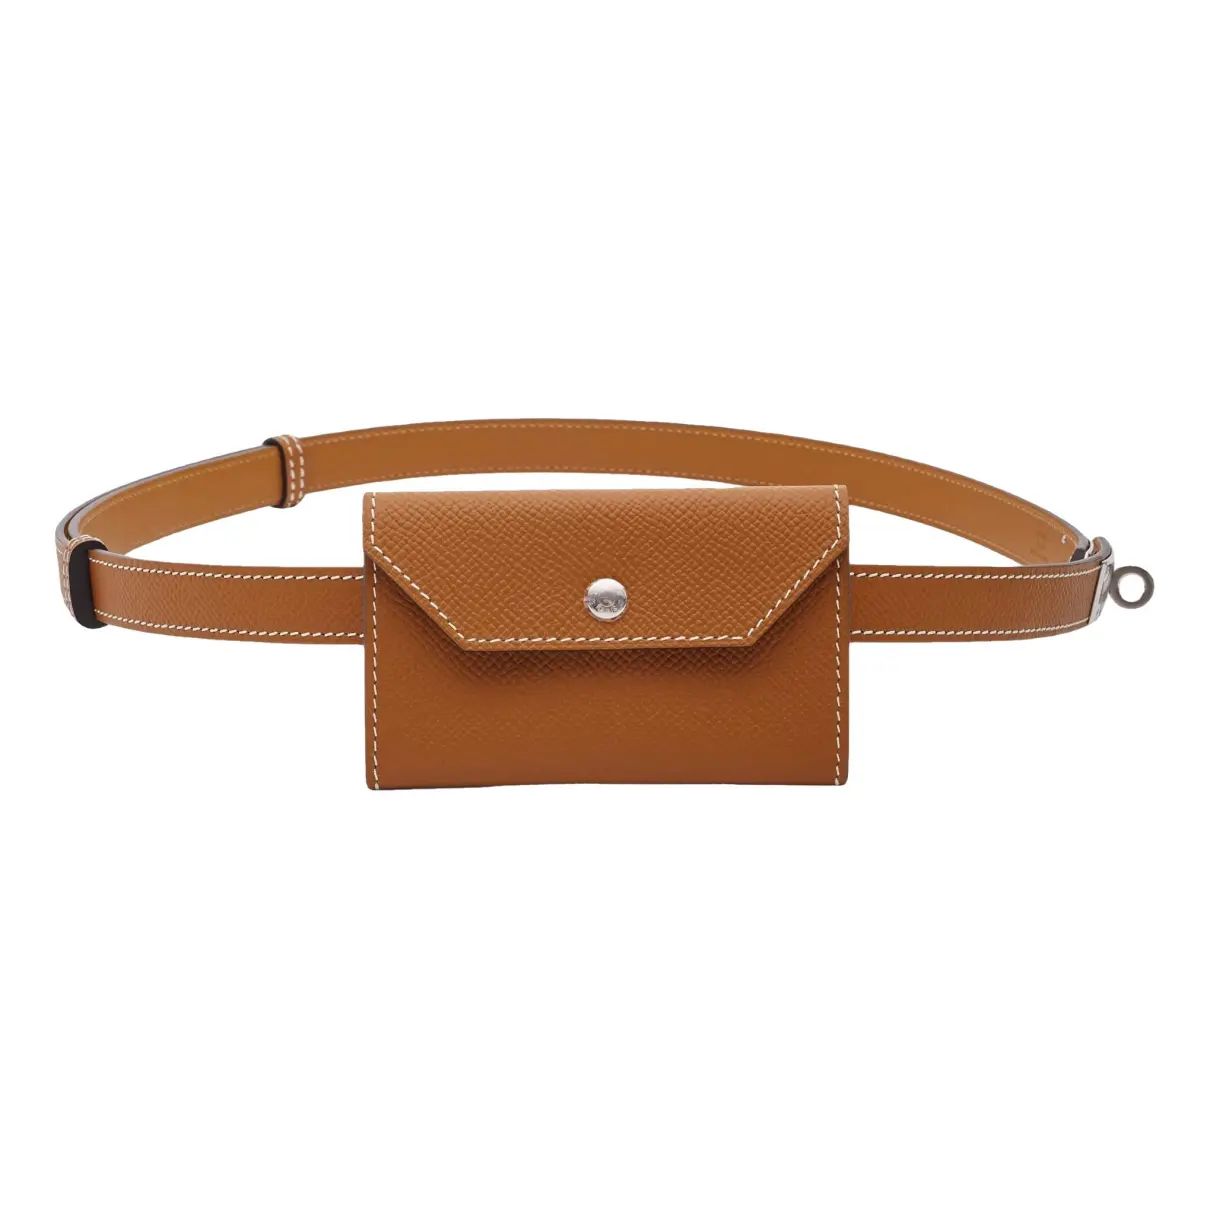 HermèsLeather handbagNever wornBrown, Leather$3,500Use code COLLECTIVE15 for 15% off your first ... | Vestiaire Collective (Global)